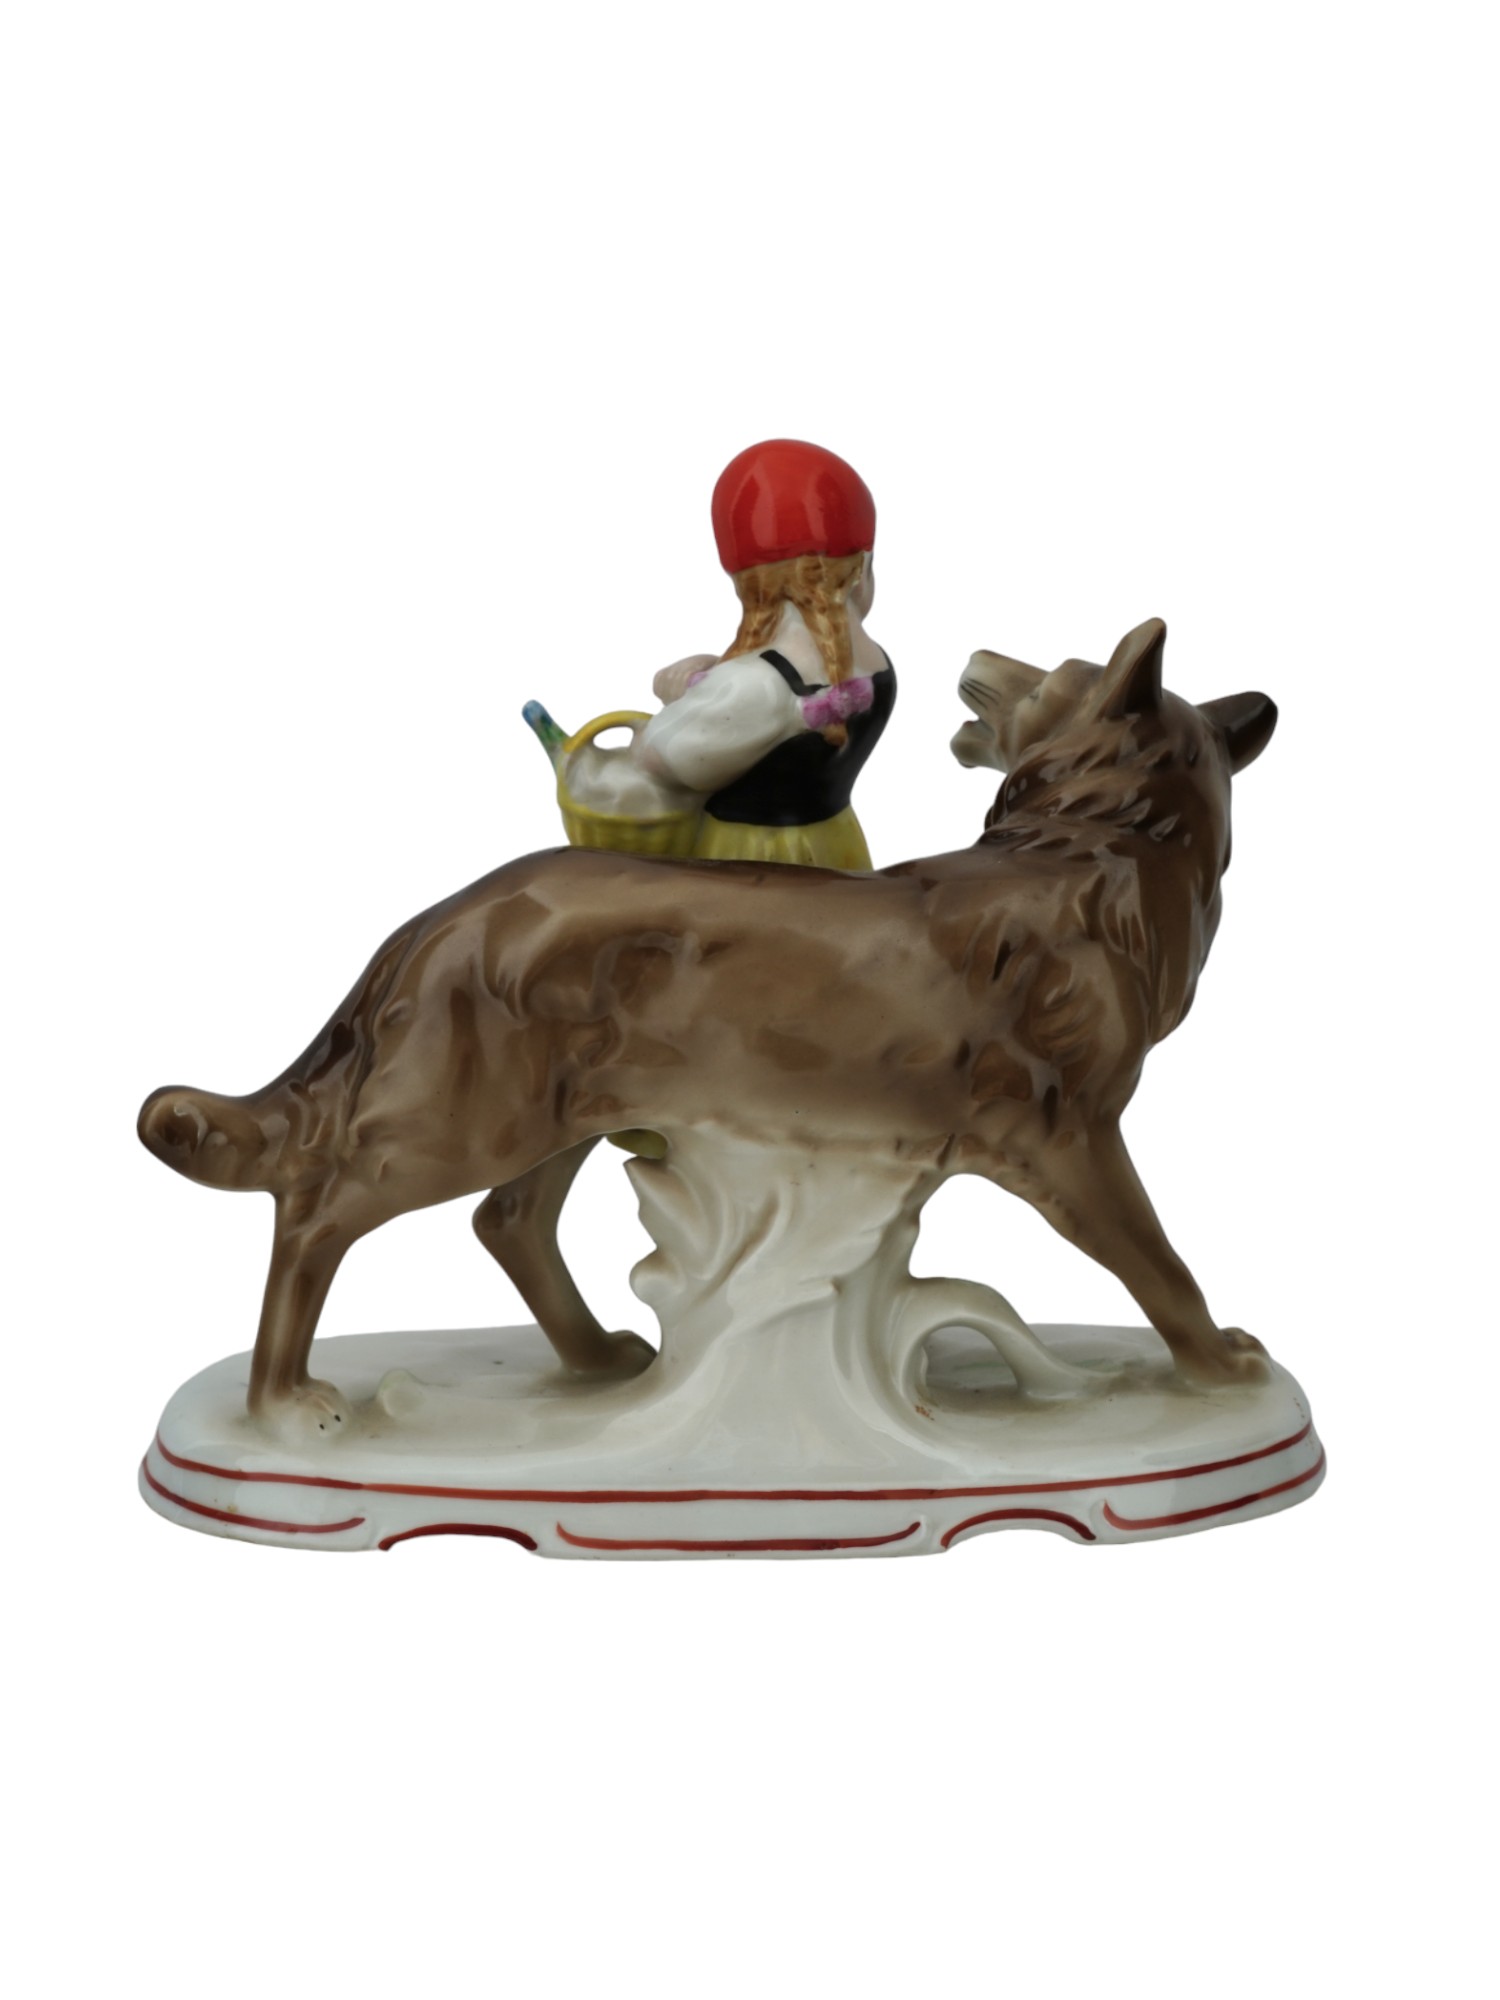 GERMAN WEISS KUHNERT RED RIDING HOOD PORCELAIN FIGURINE PIC-2